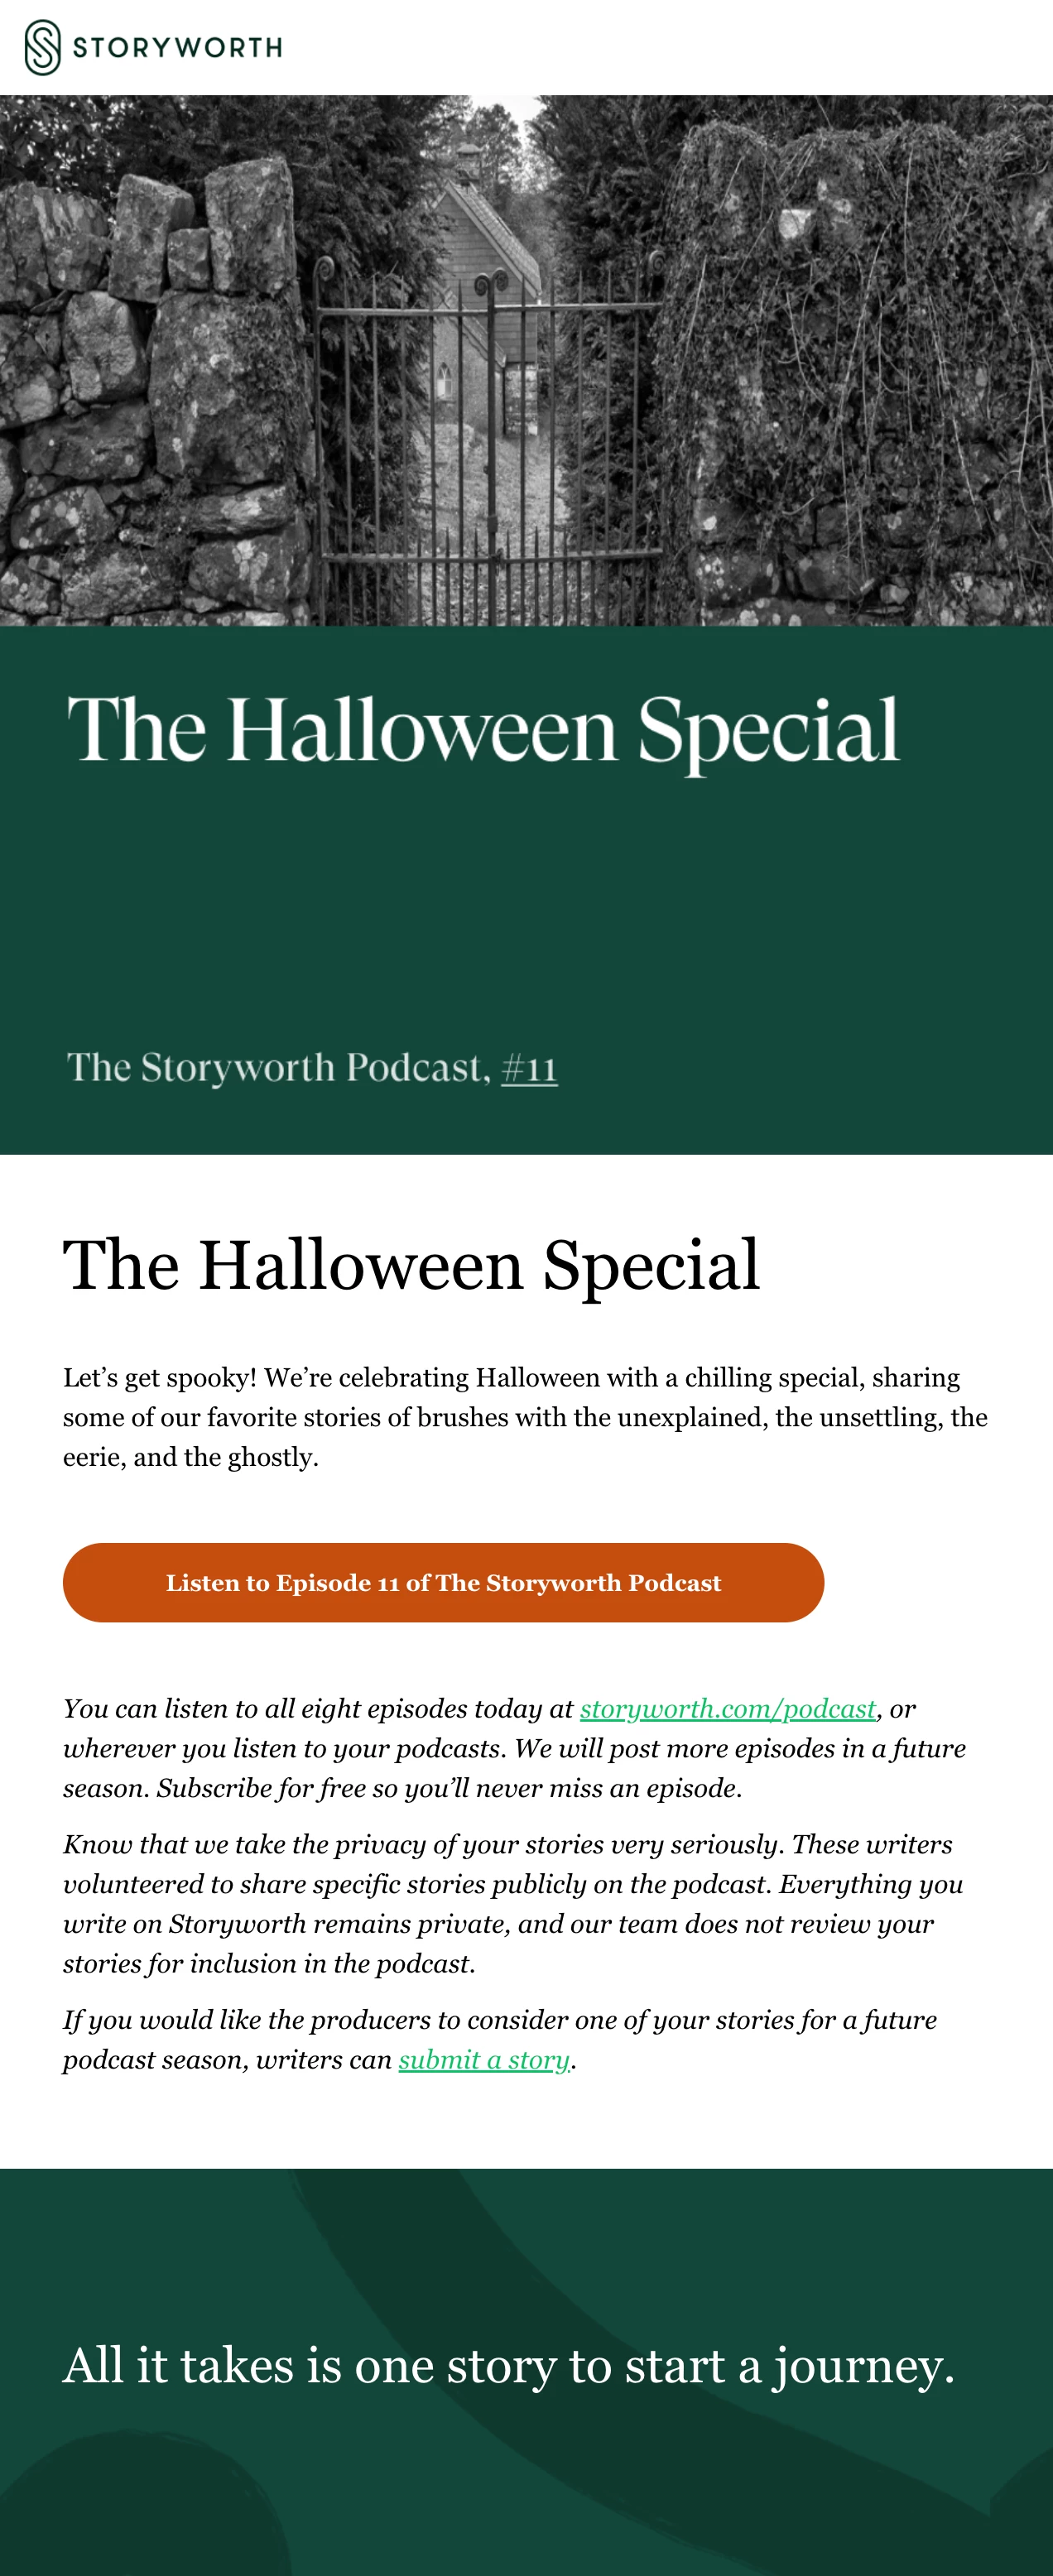 Storyworth spooky halloween email campaign